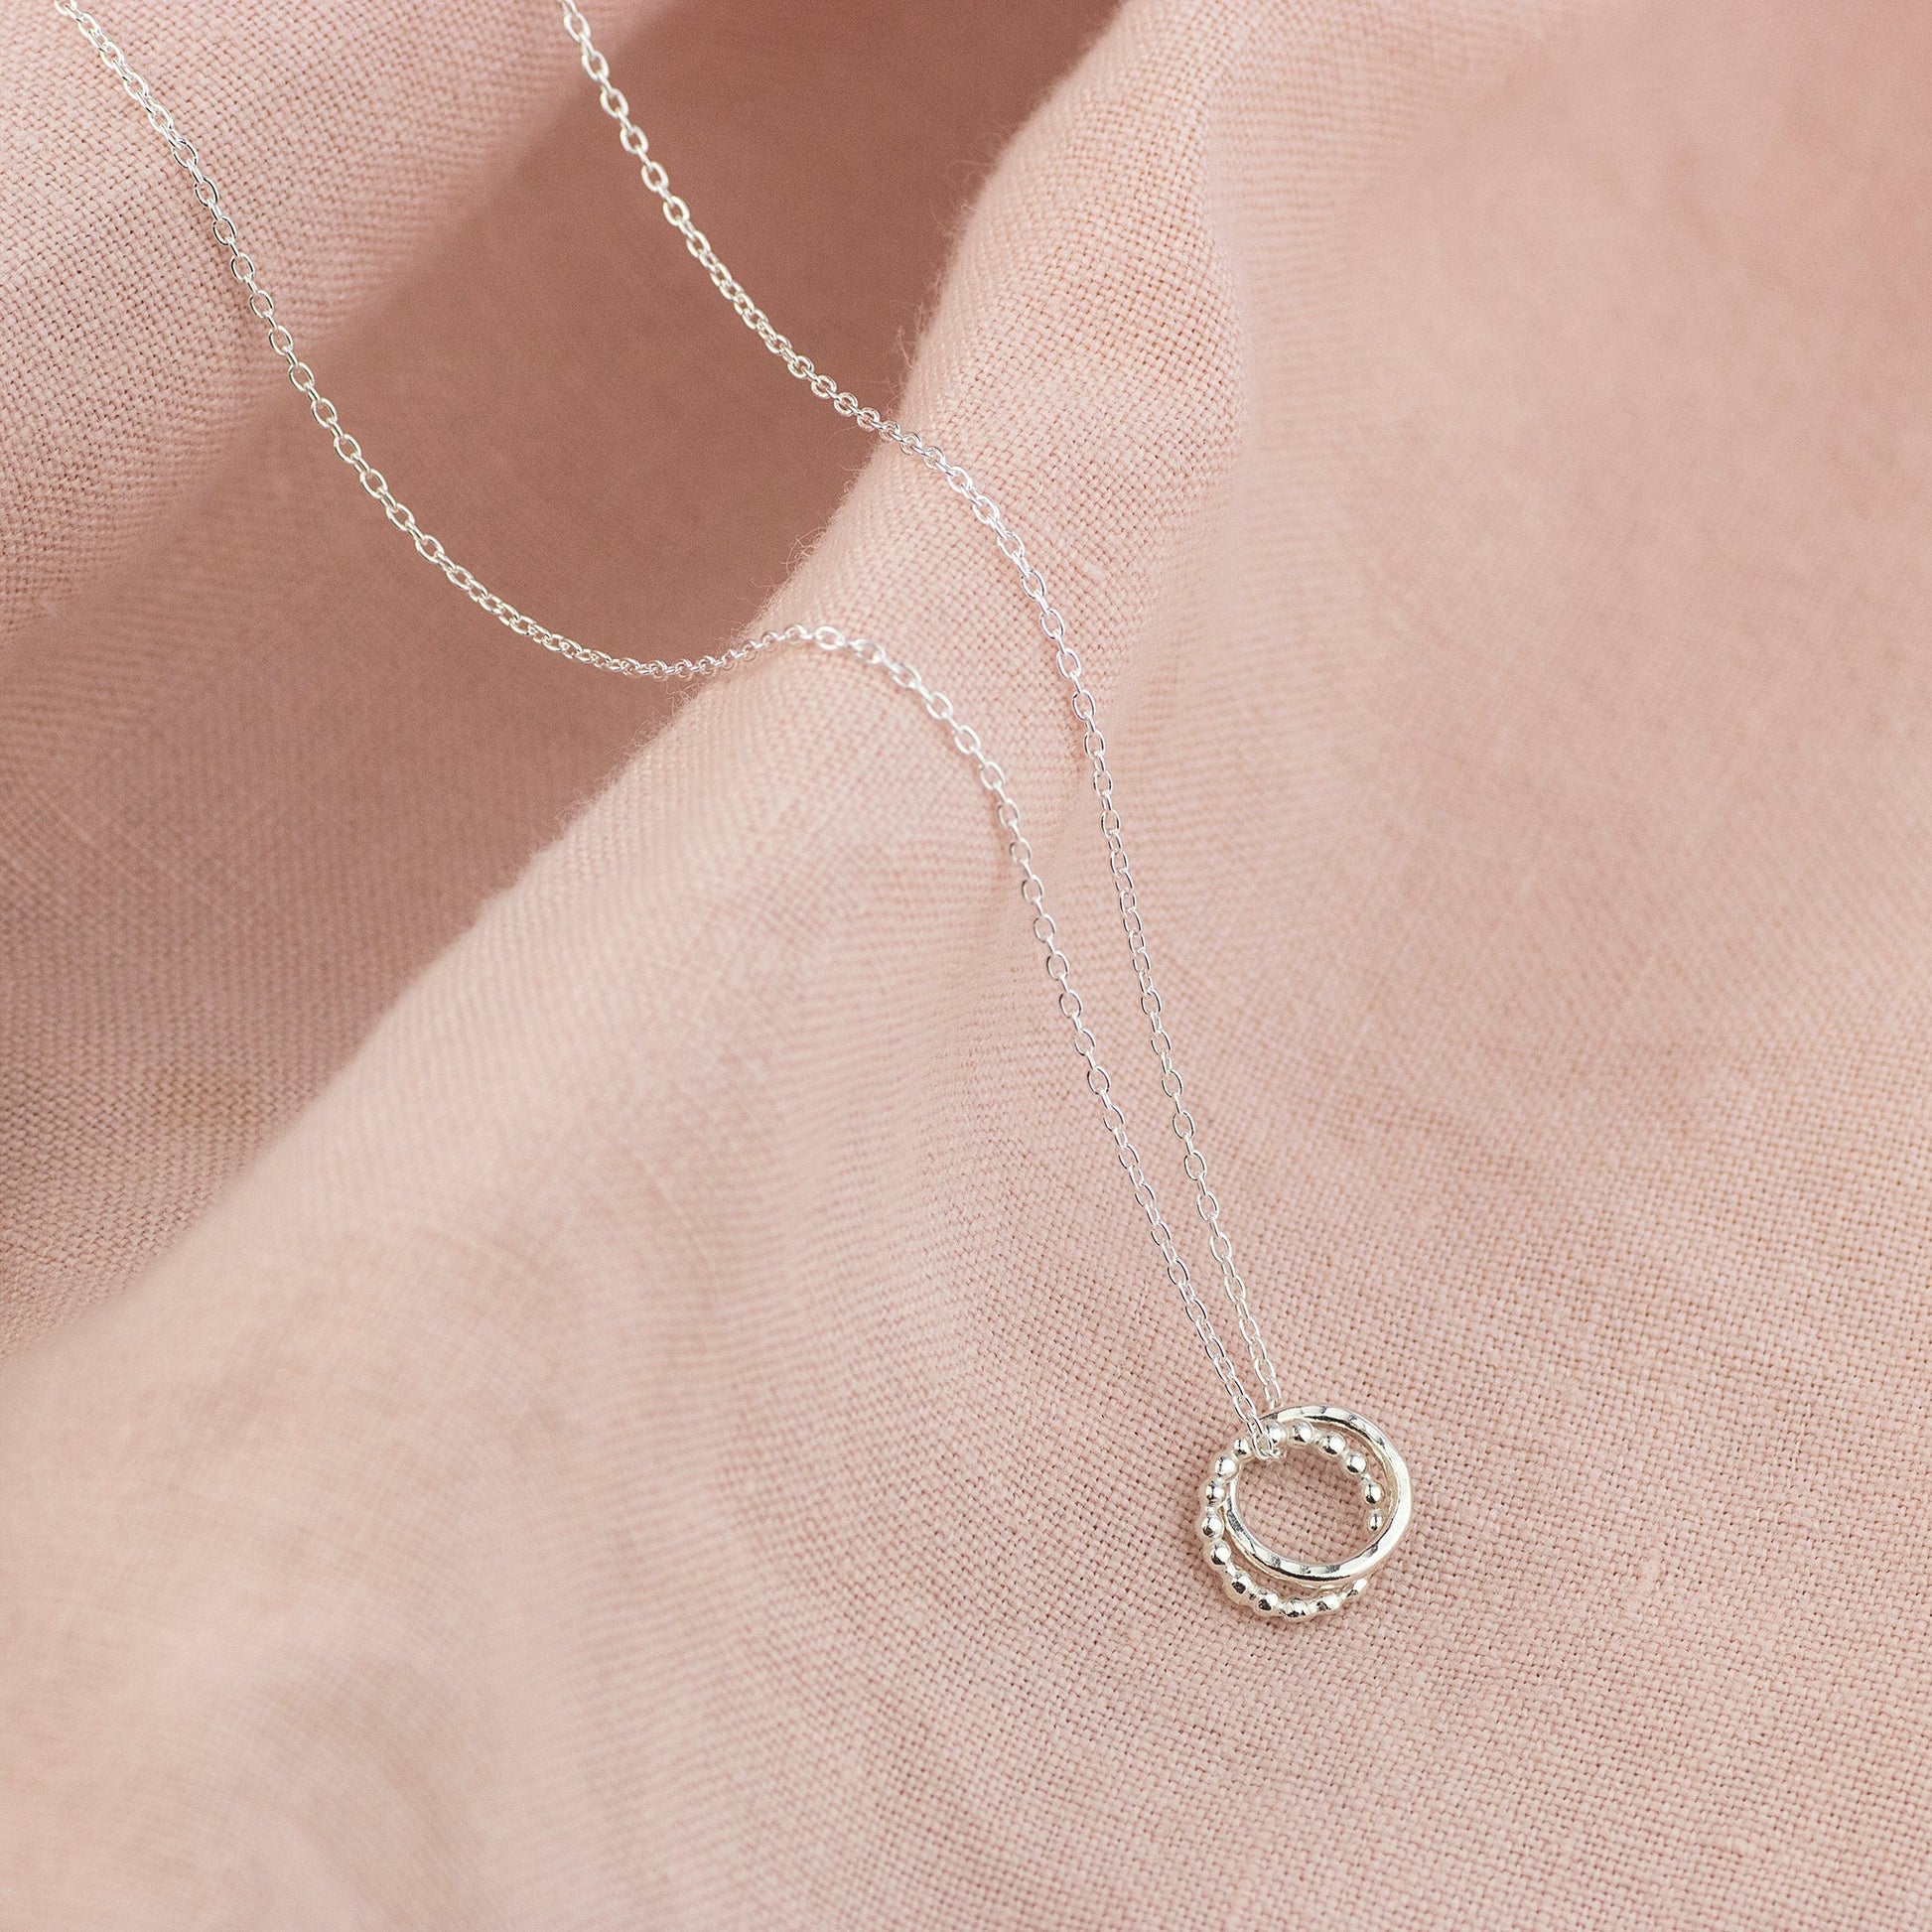 Gift for Daughter from Father - Silver Love Knot Necklace